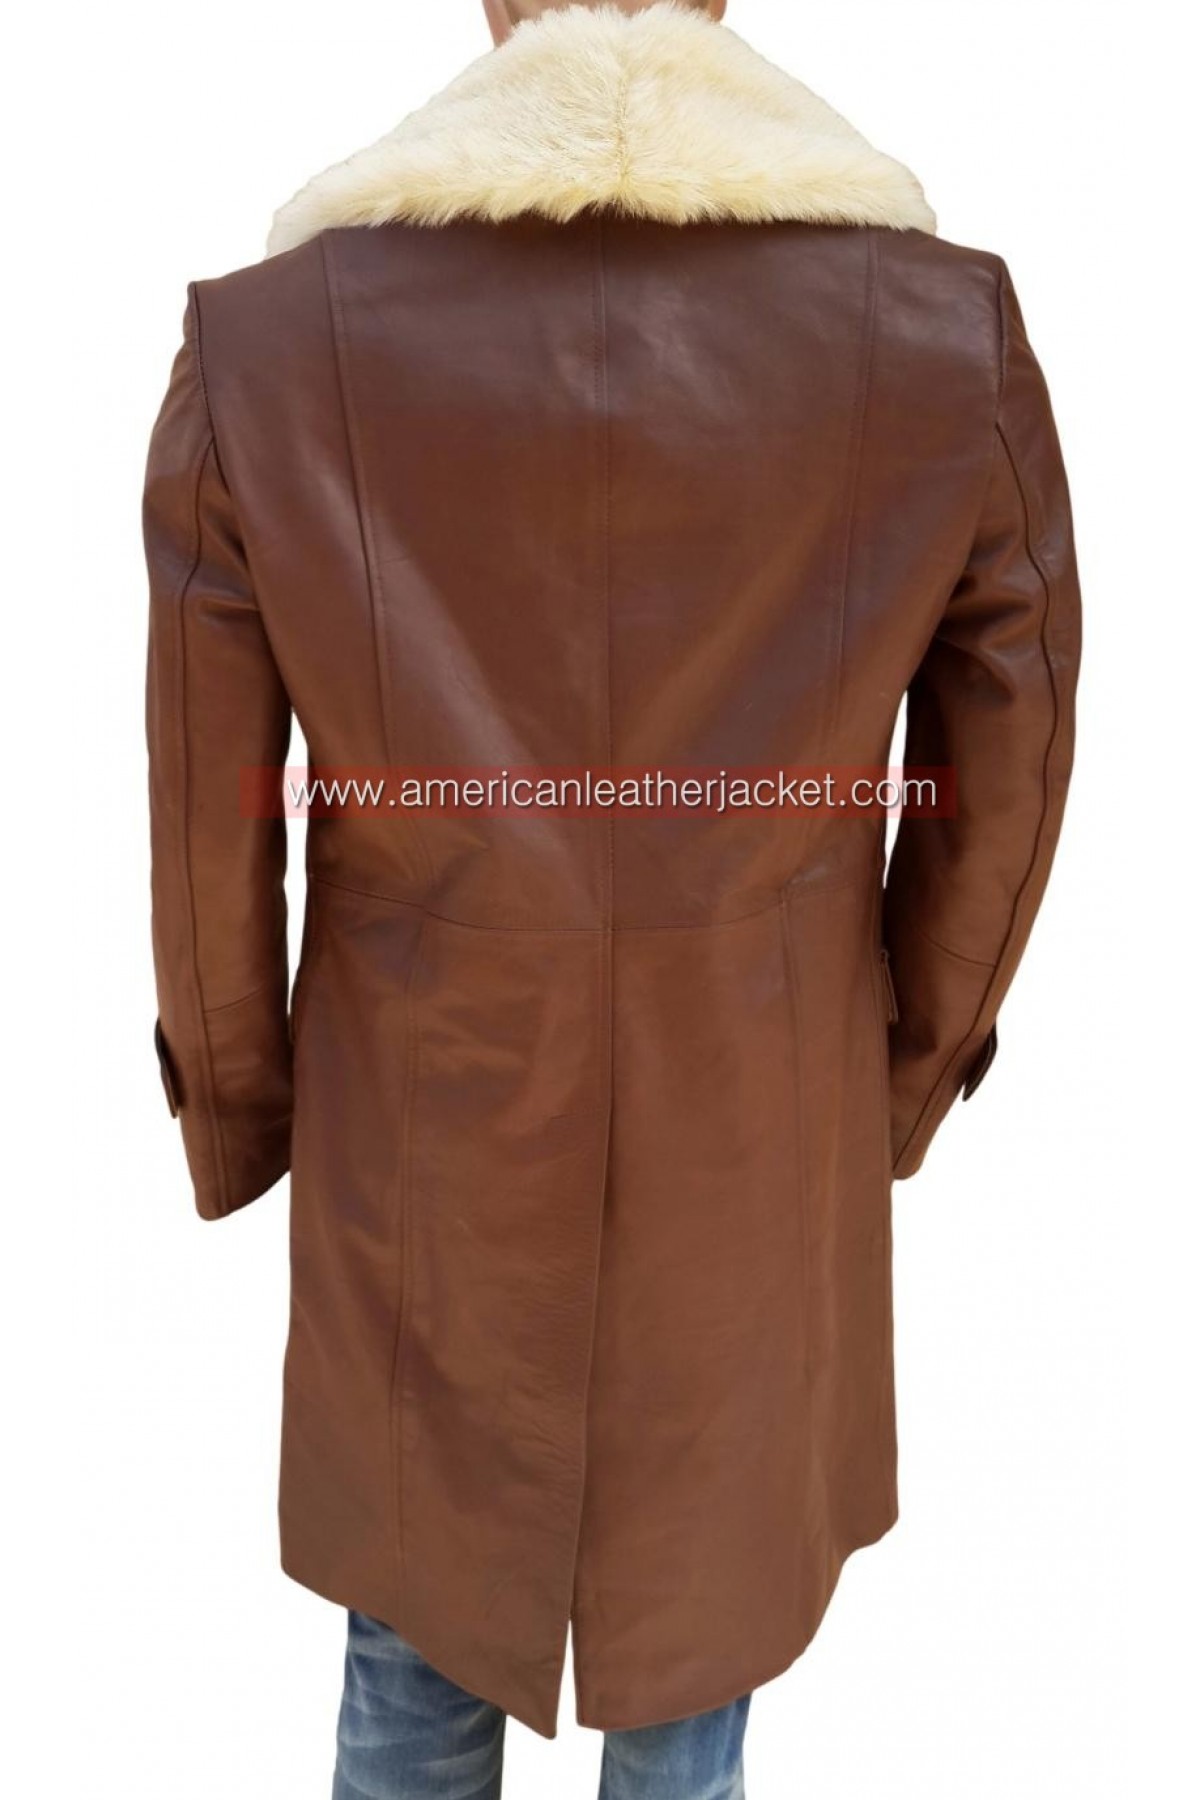 Ron Burgundy Leather Coat - Anchorman 2 The Legend Continues Coat